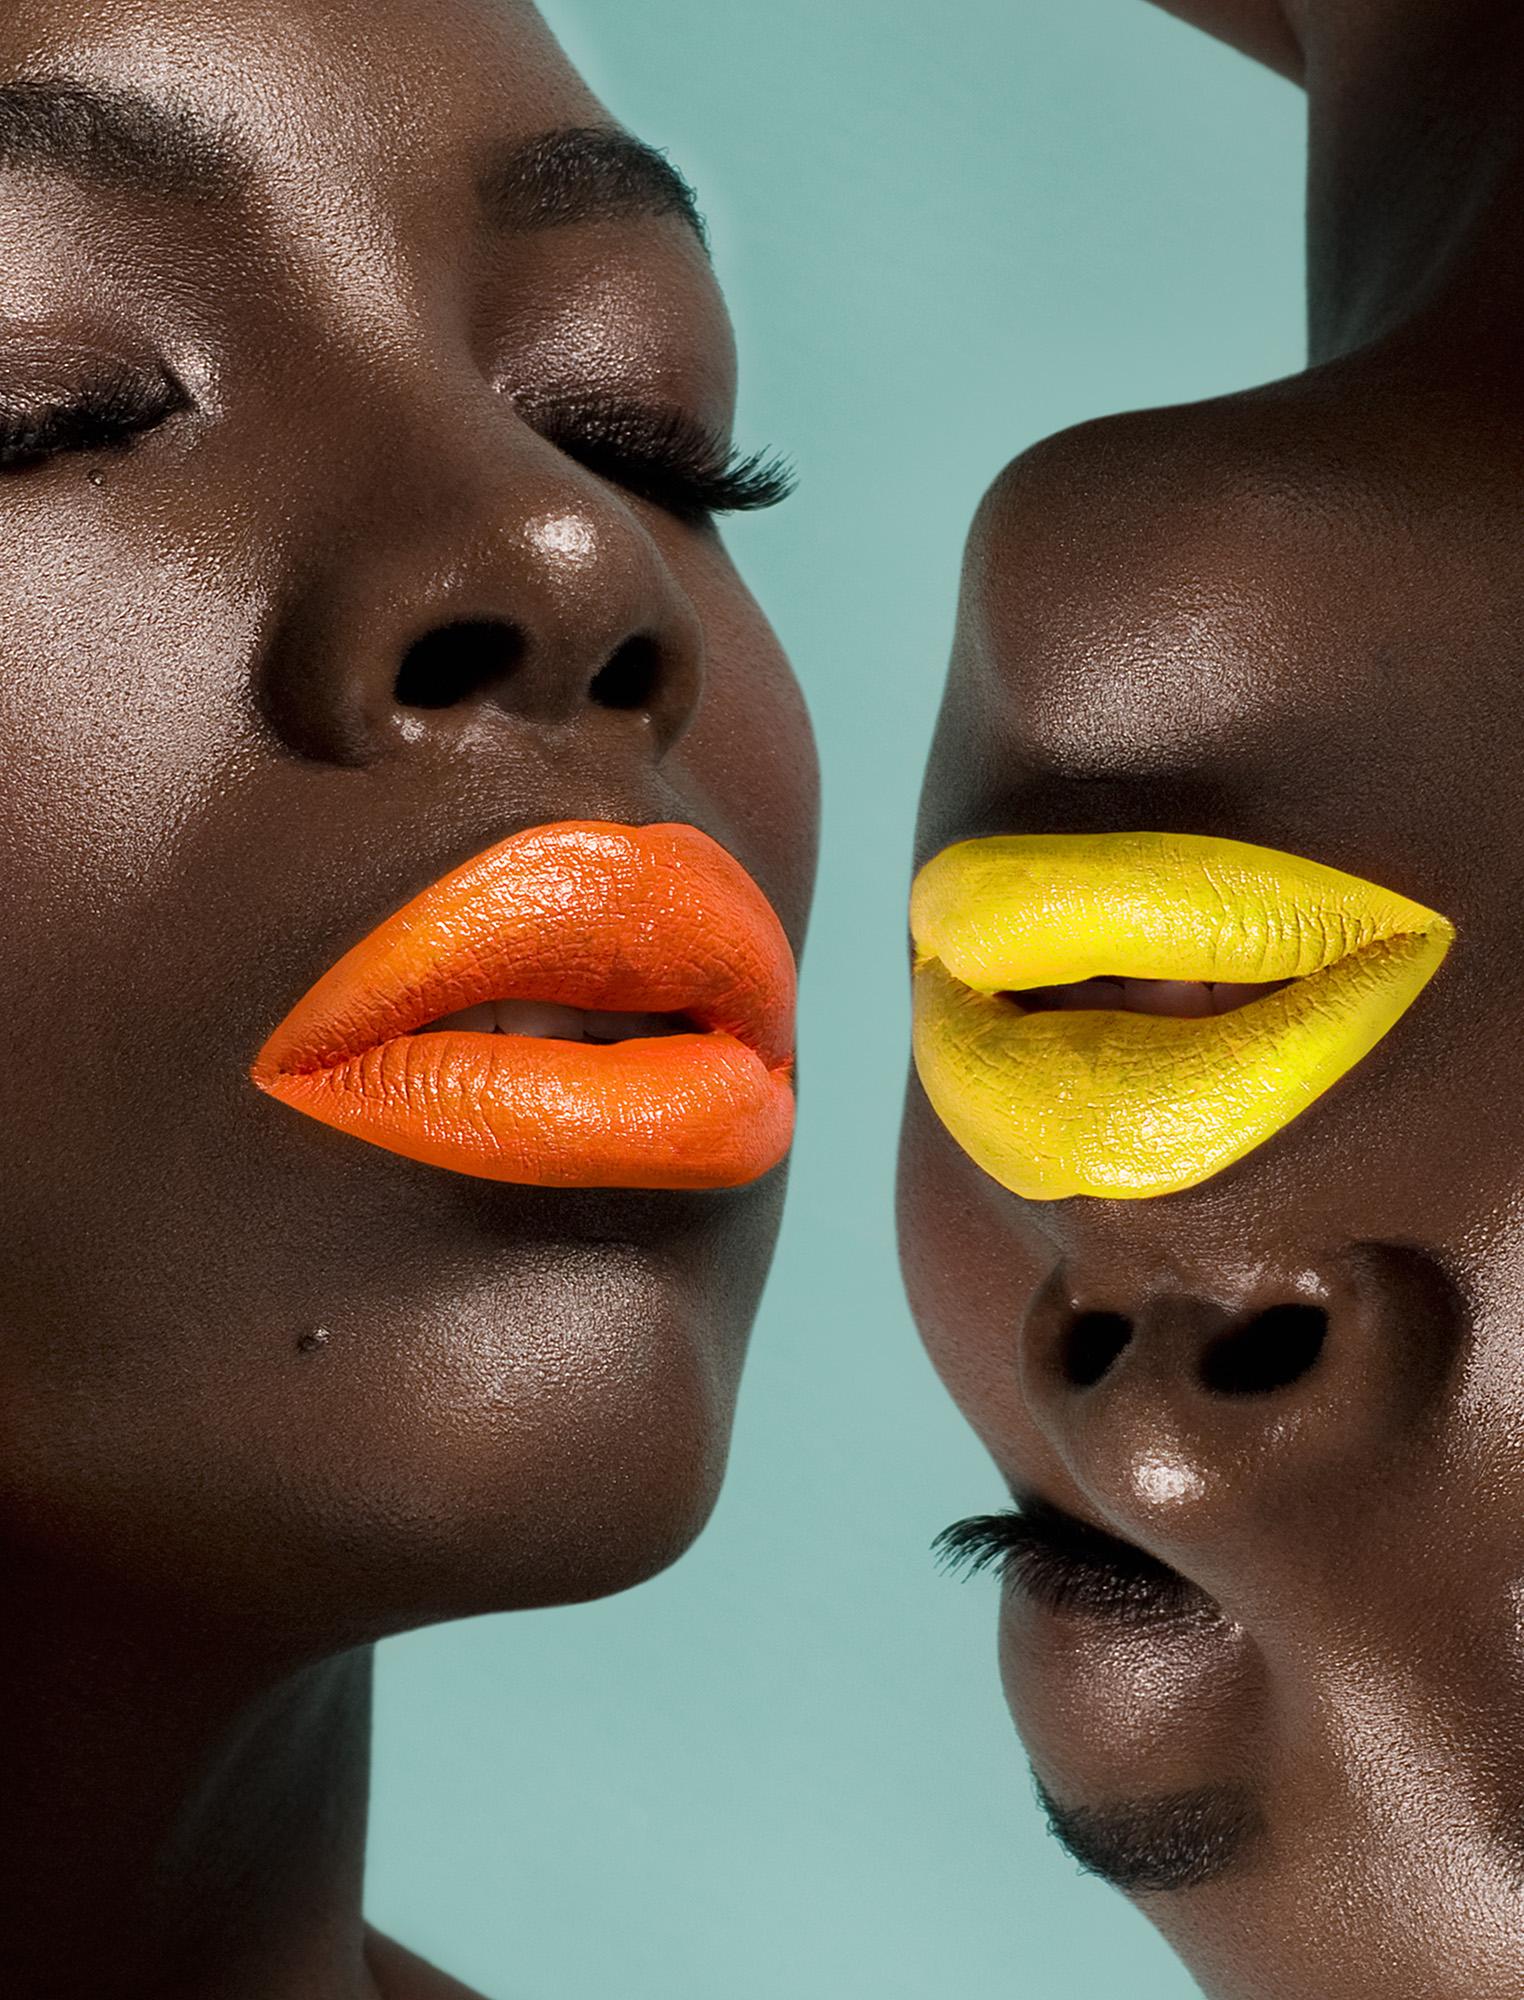 Pop Lips One, 21st century, contemporary, photography